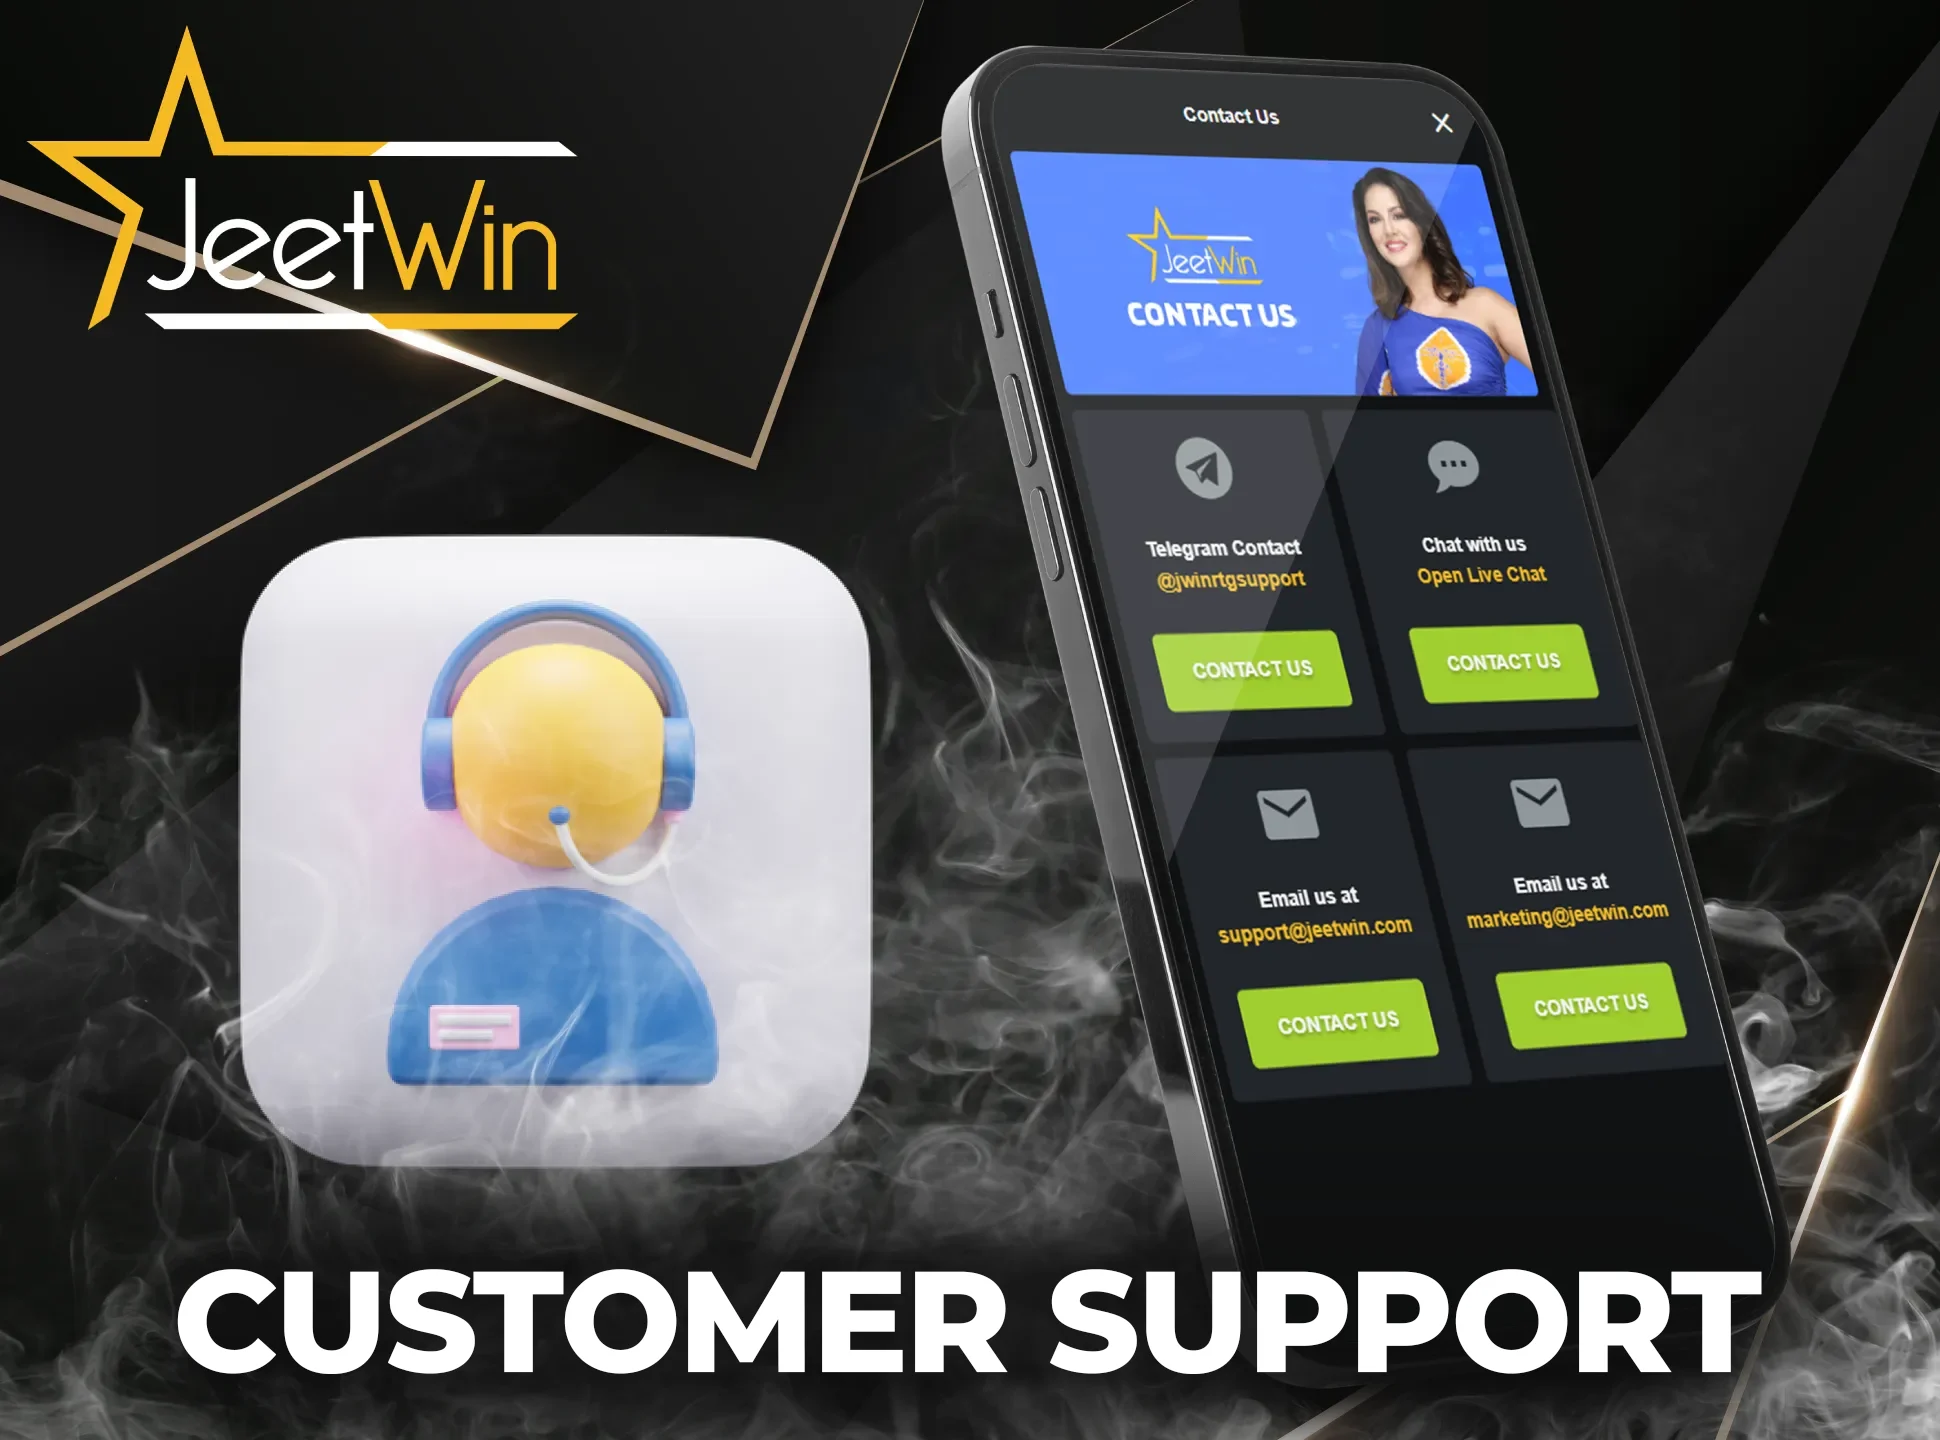 The user can always contact the JeetWin support team.